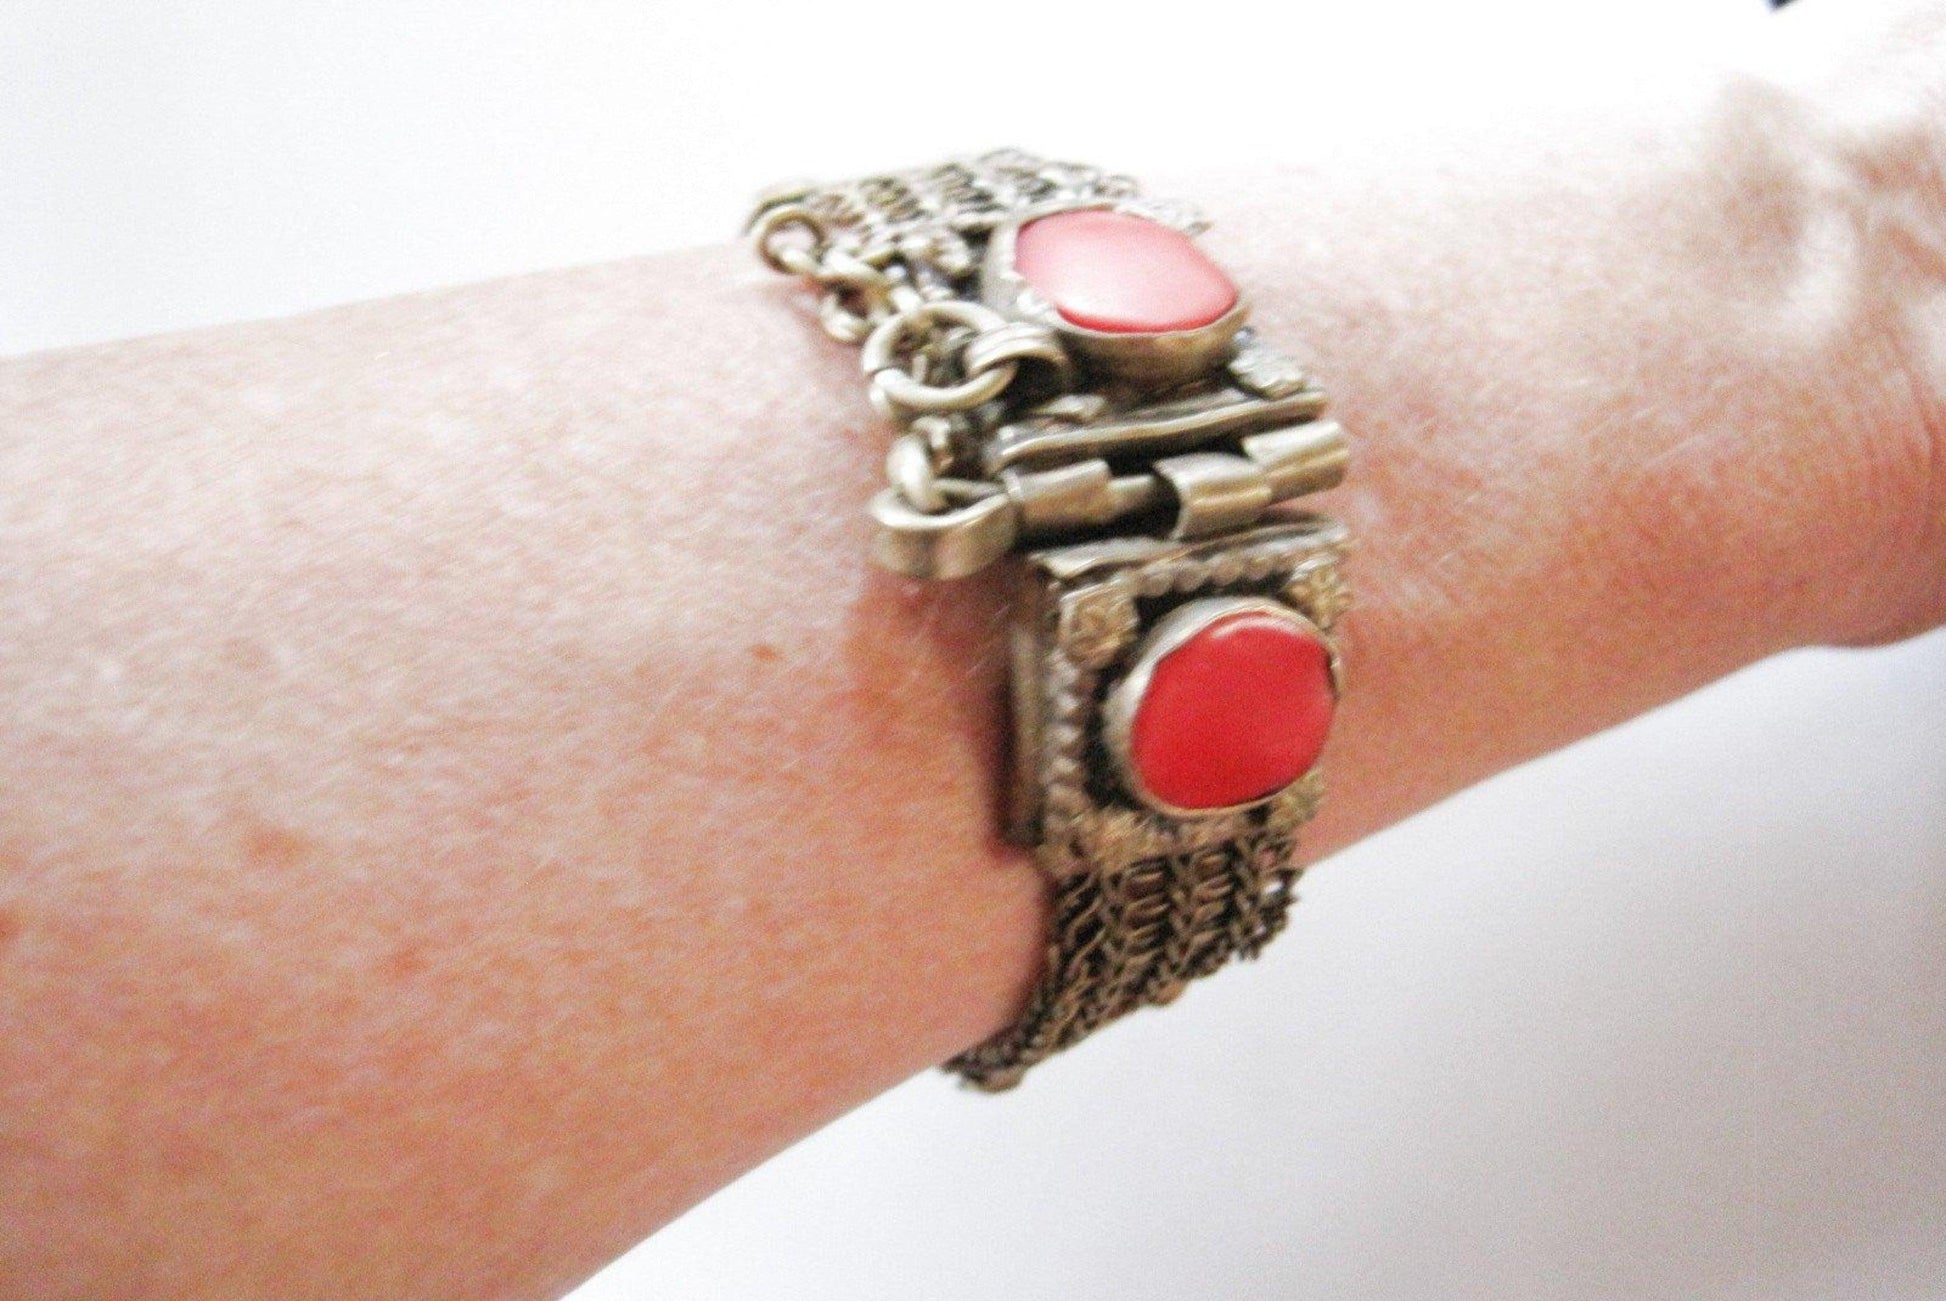 Old Large Metal Mesh Bedouin Bracelet with Red Glass from the Arabian Peninsula - Anteeka